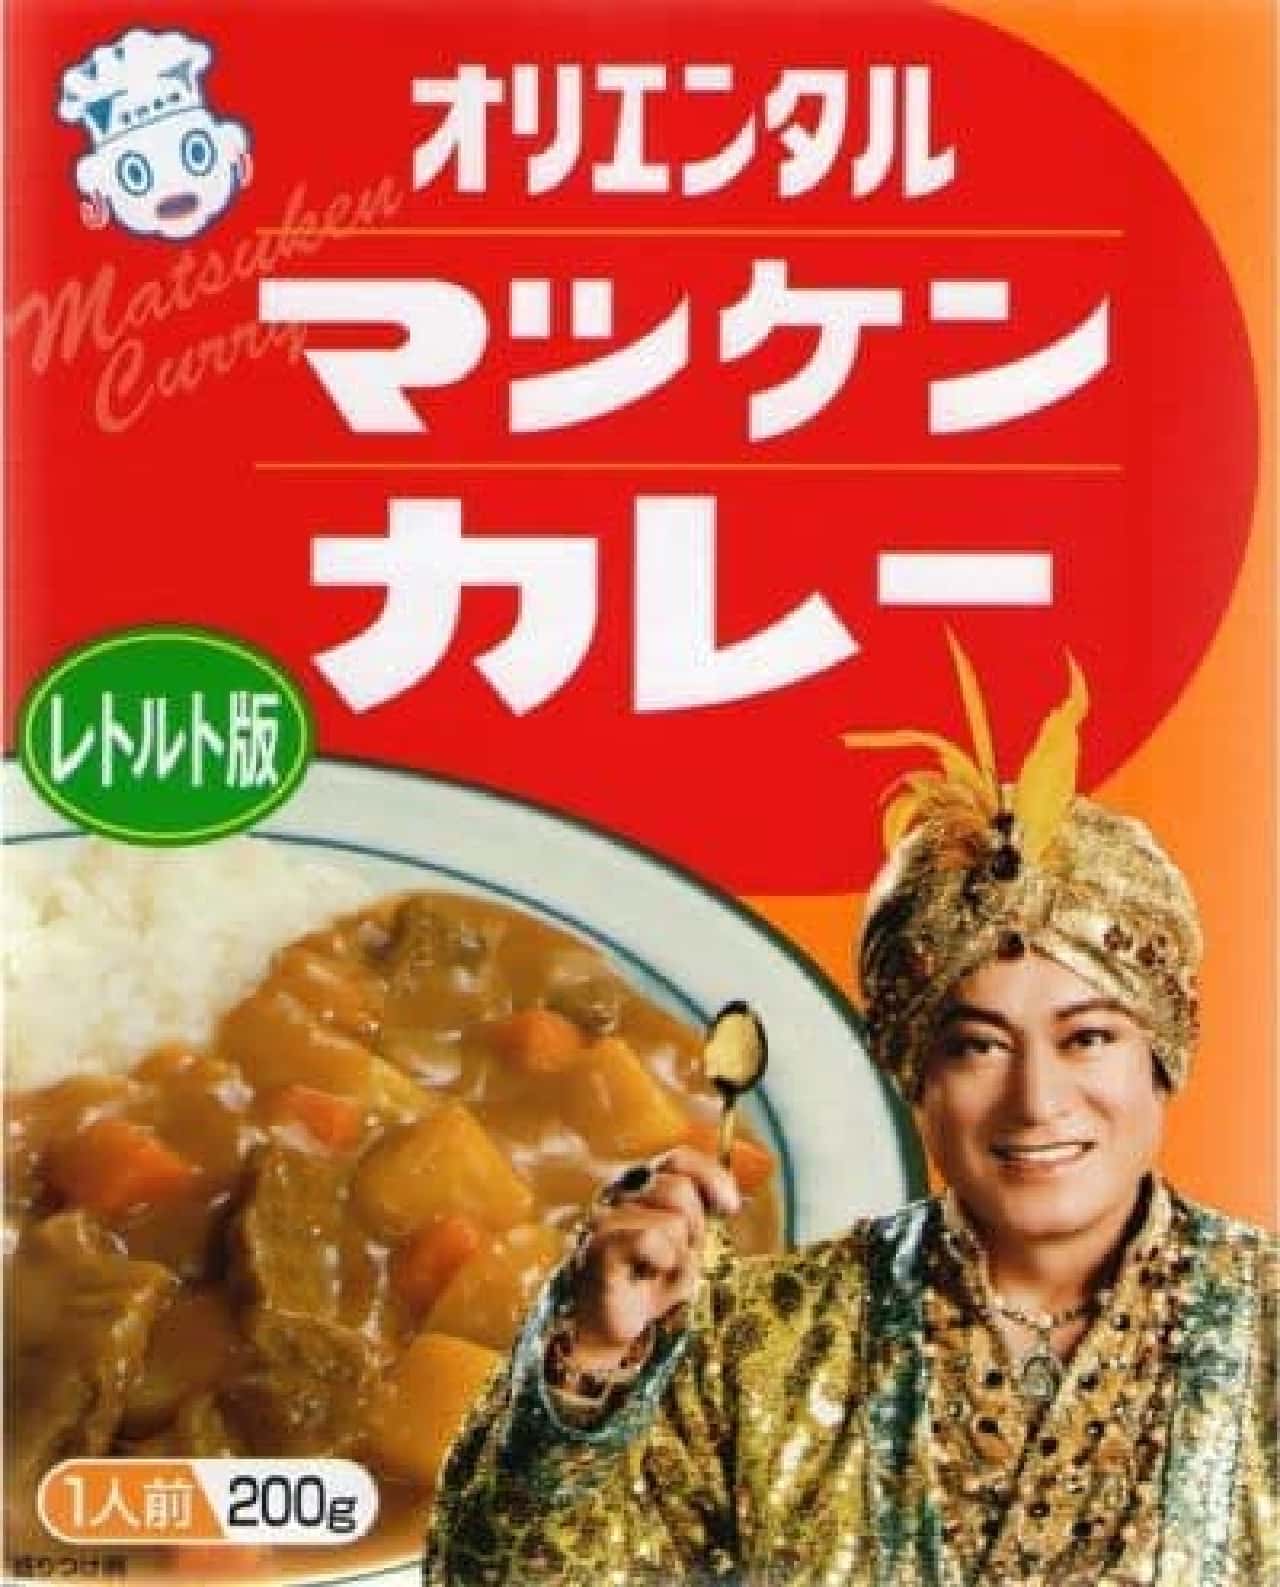 A package that makes you doubt your eyes. Powerful package! What kind of taste is "Matsuken-flavored" curry?